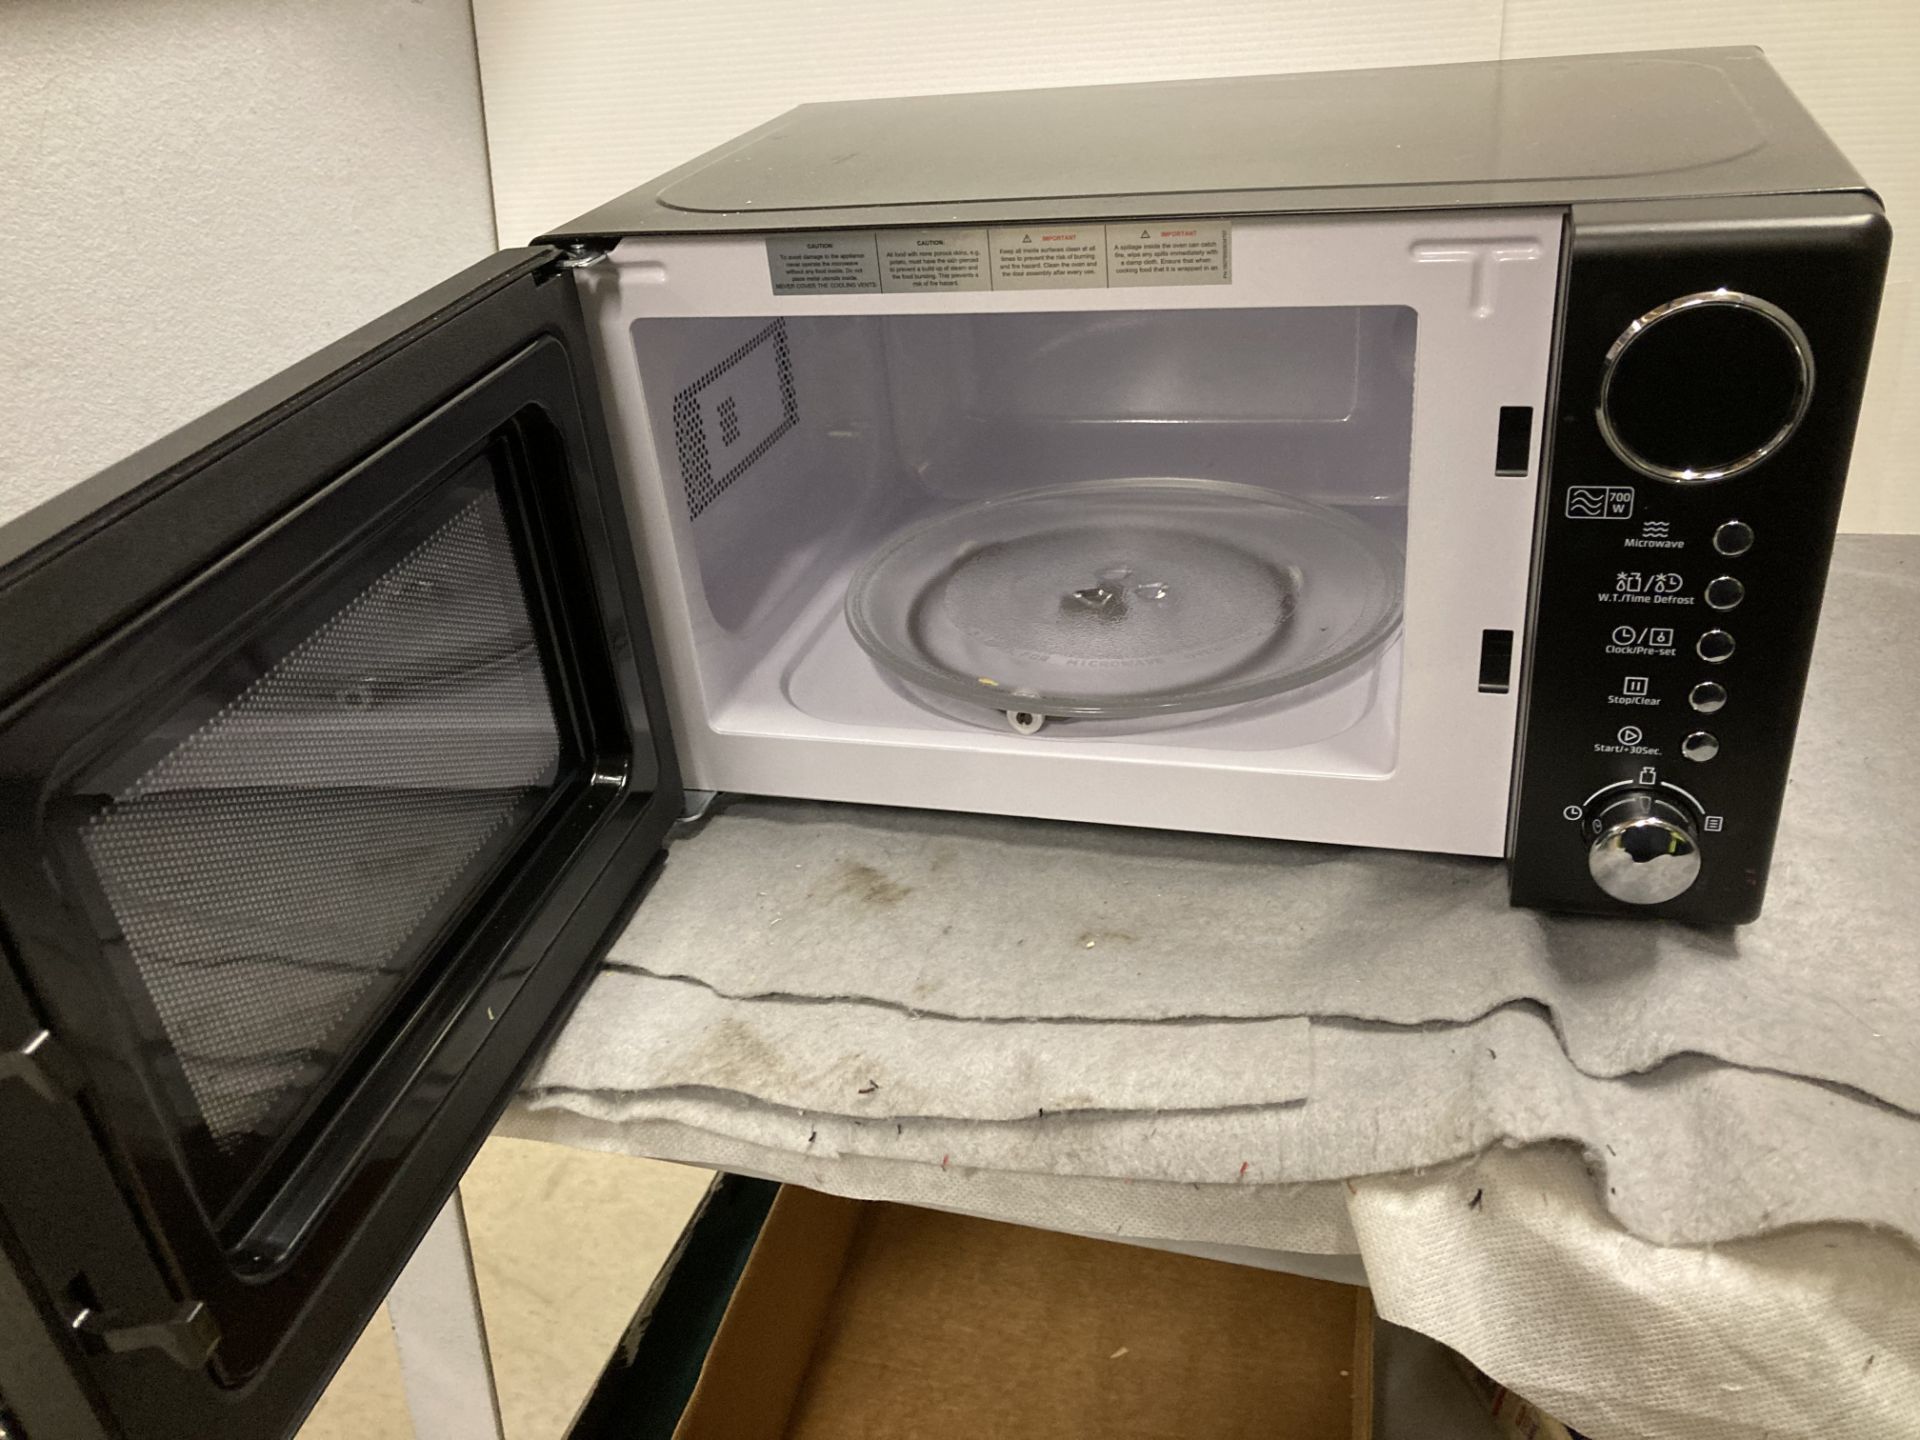 Goodman microwave oven 355250 *Please note the final purchase price is subject to 20% VAT on the - Image 2 of 2